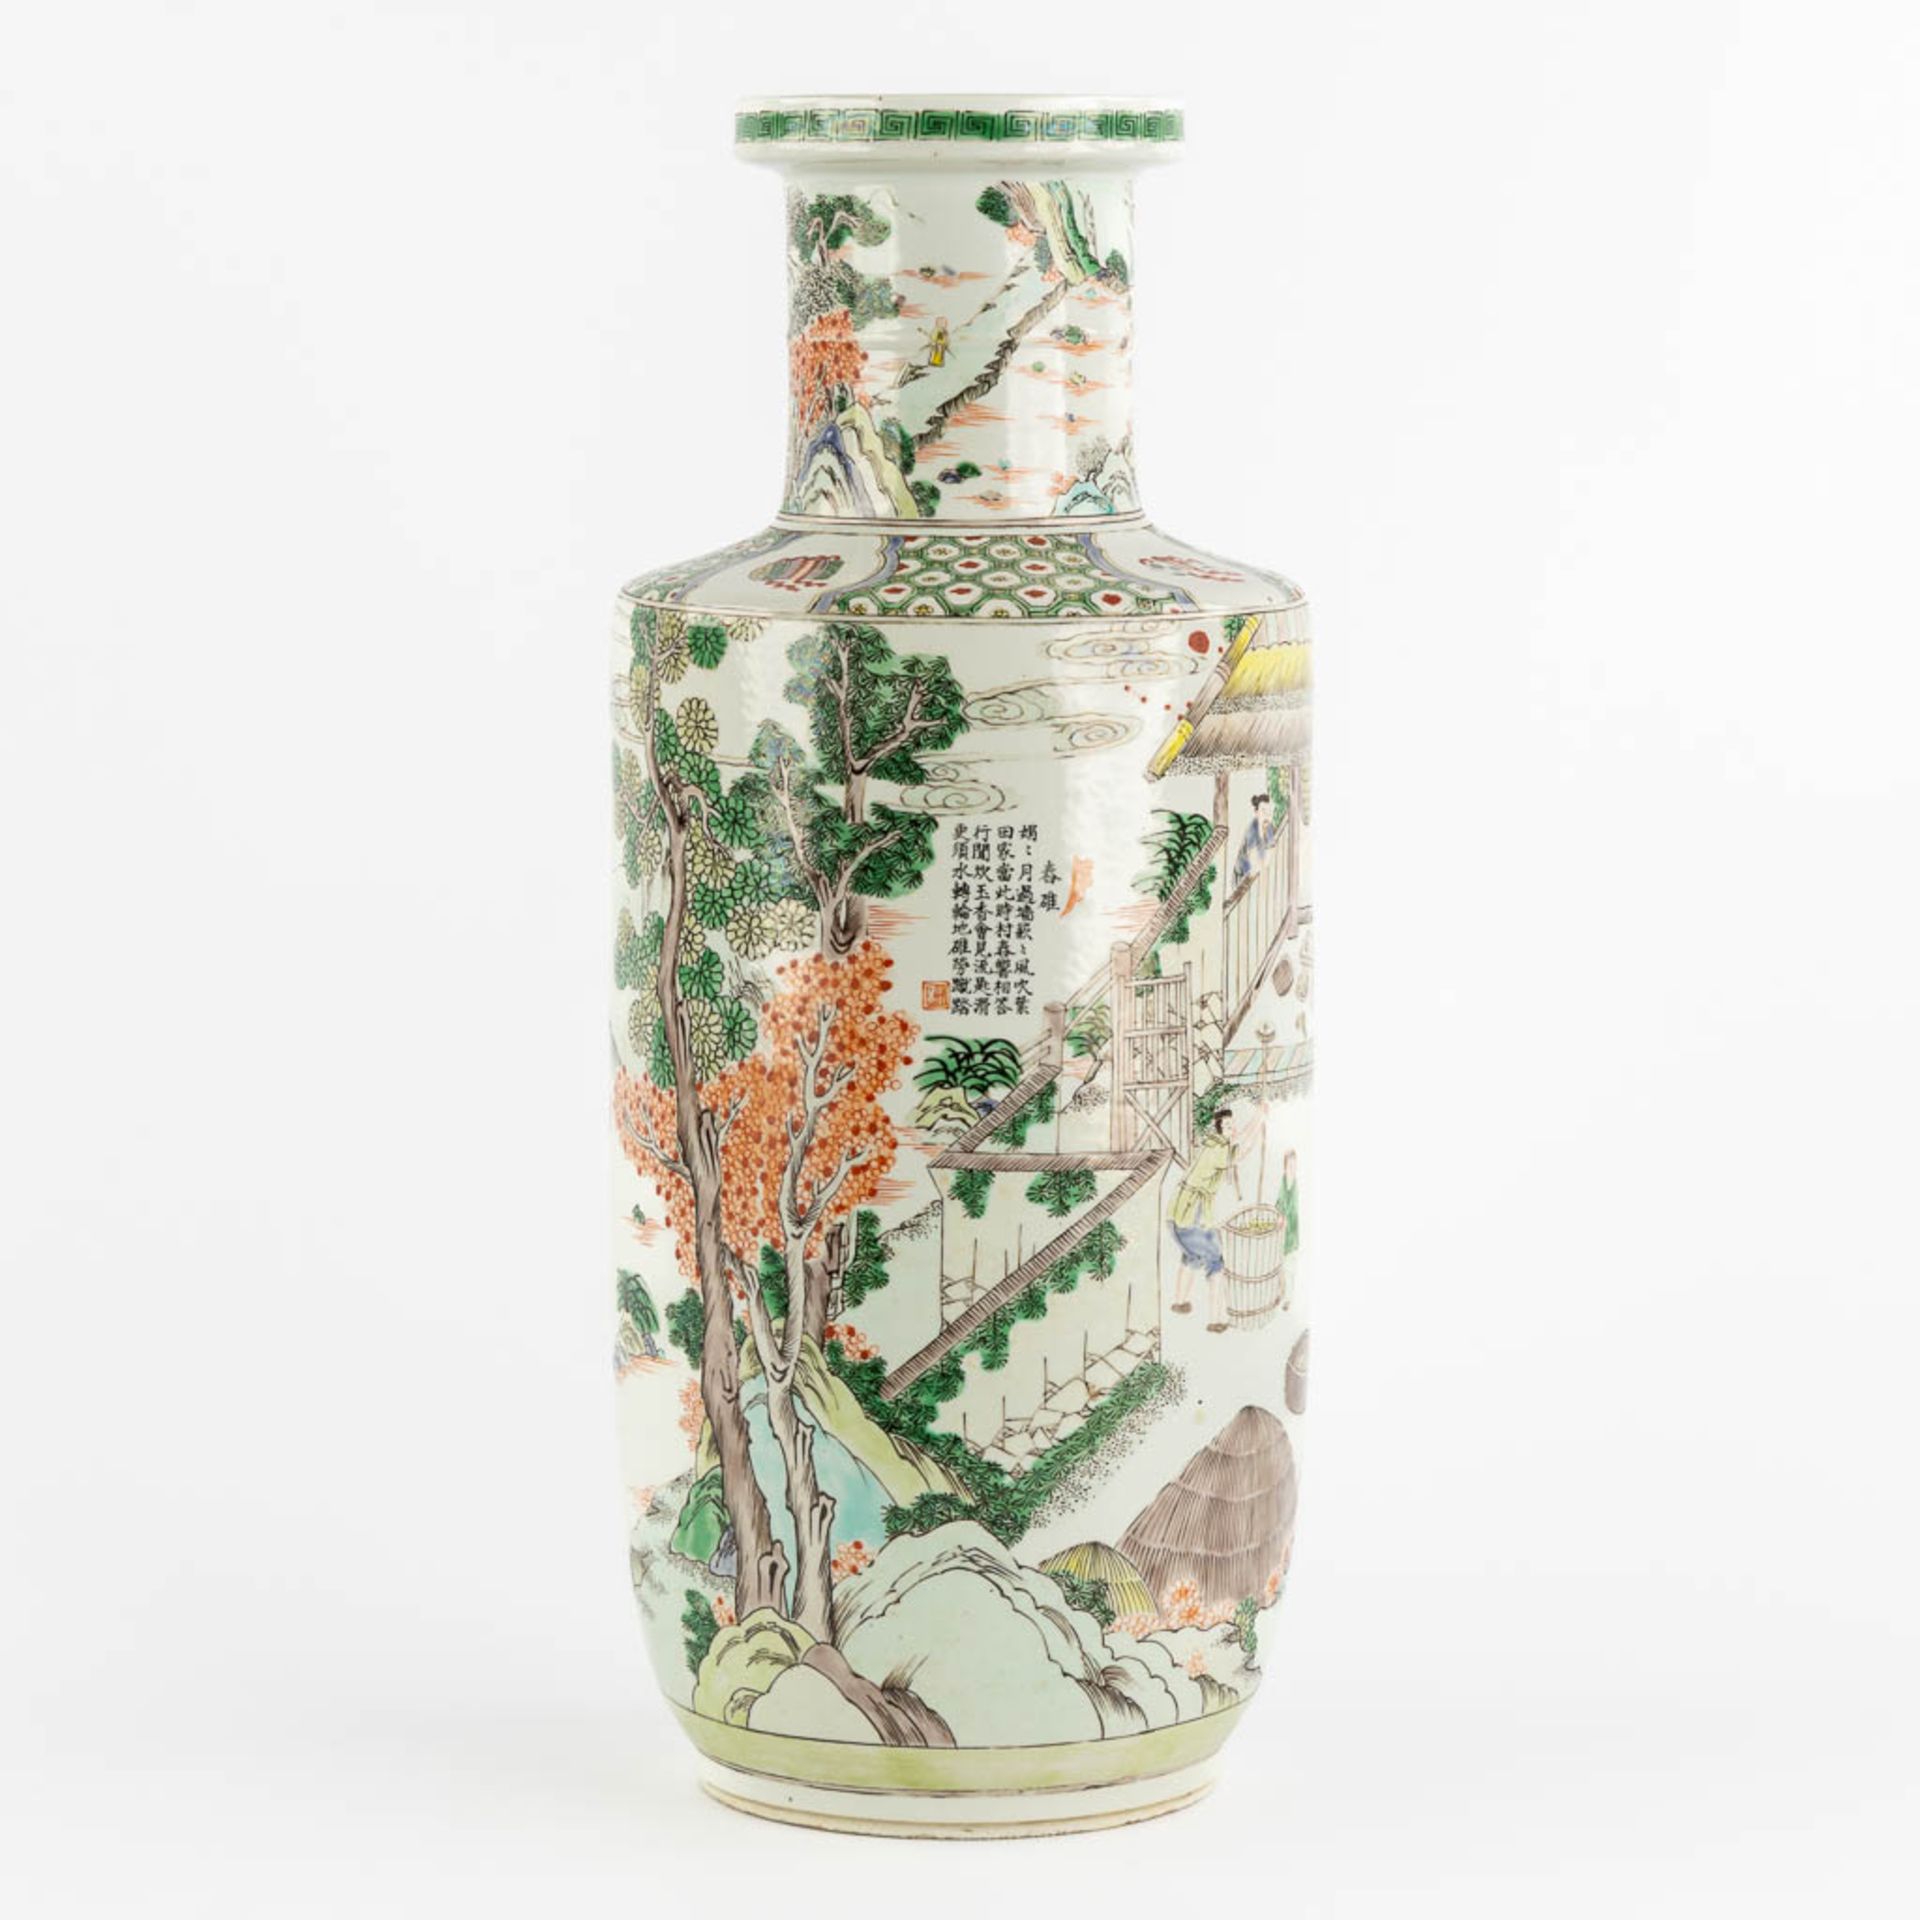 A Chinese Famille Verte 'Roulleau' vase with scènes of rice production. (H:46 x D:18 cm) - Image 3 of 13